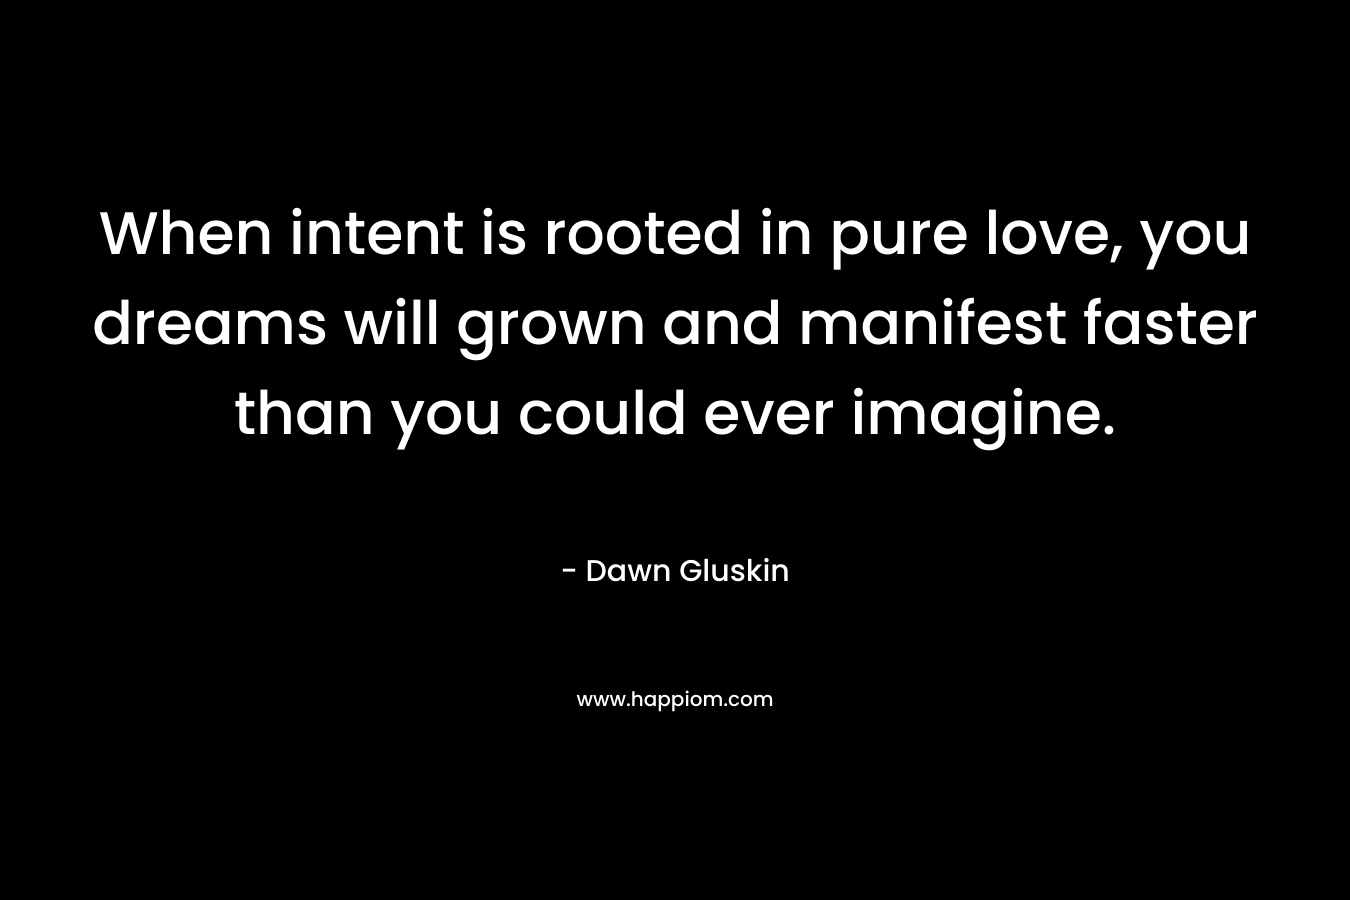 When intent is rooted in pure love, you dreams will grown and manifest faster than you could ever imagine. – Dawn Gluskin